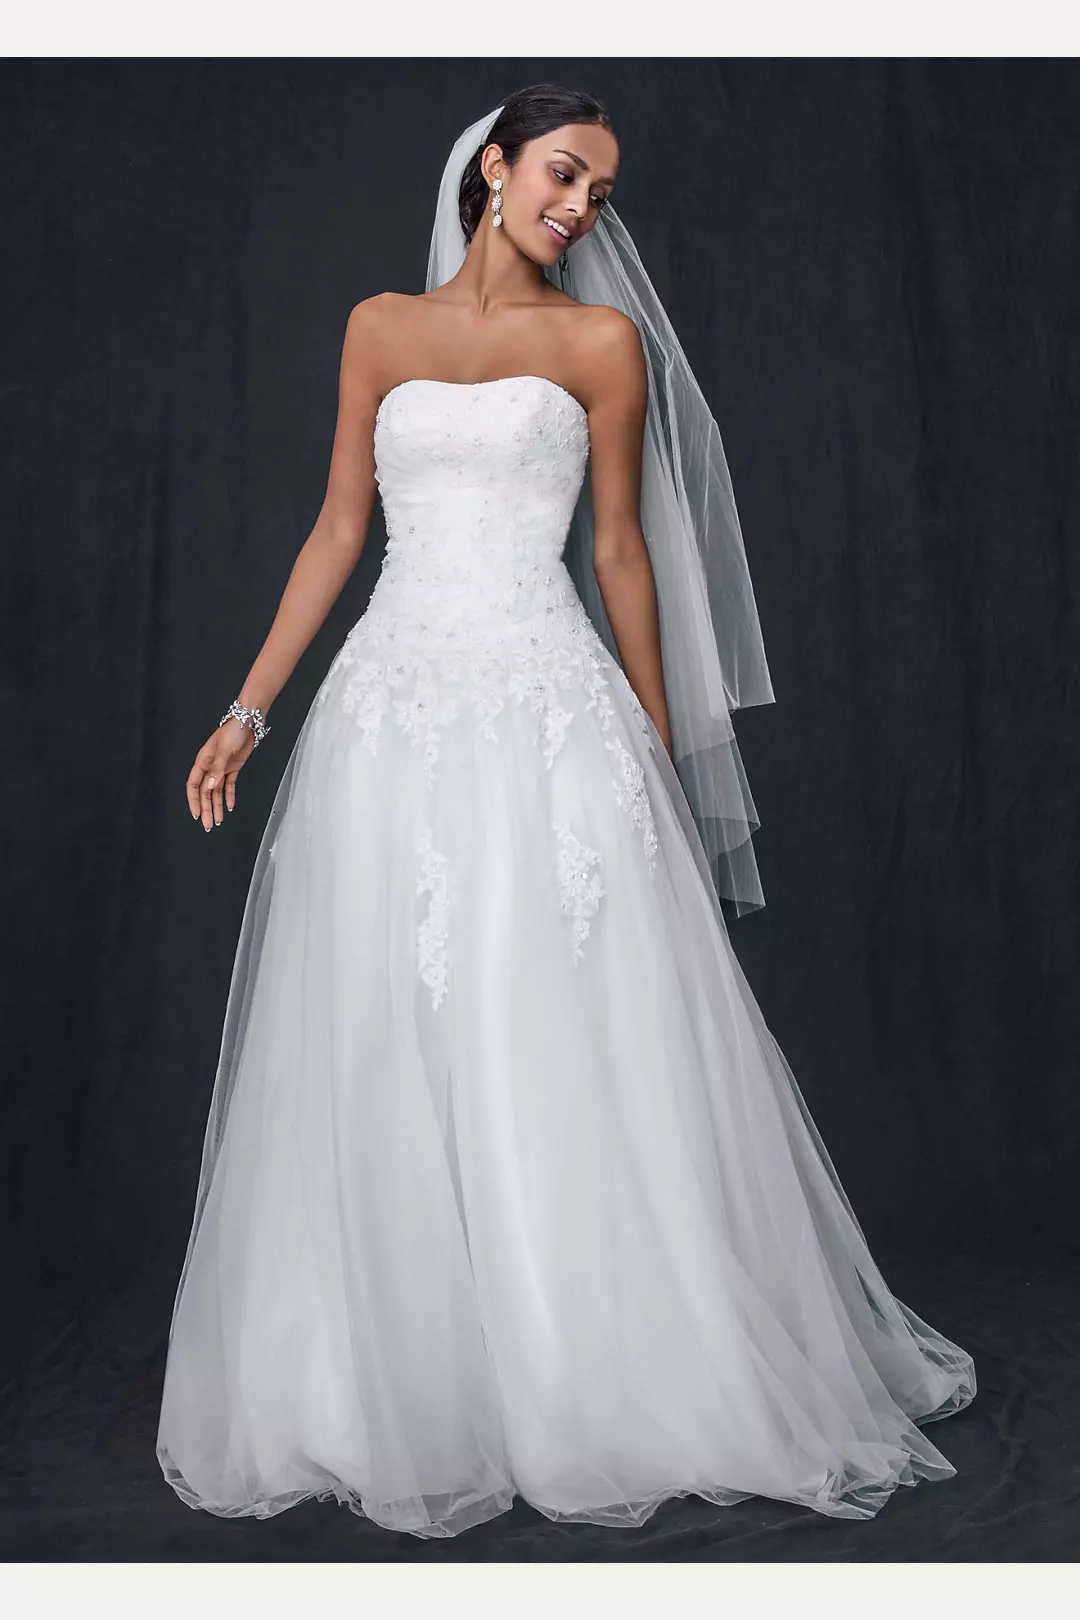 Strapless A-line Wedding Dress With Embroidered Lace